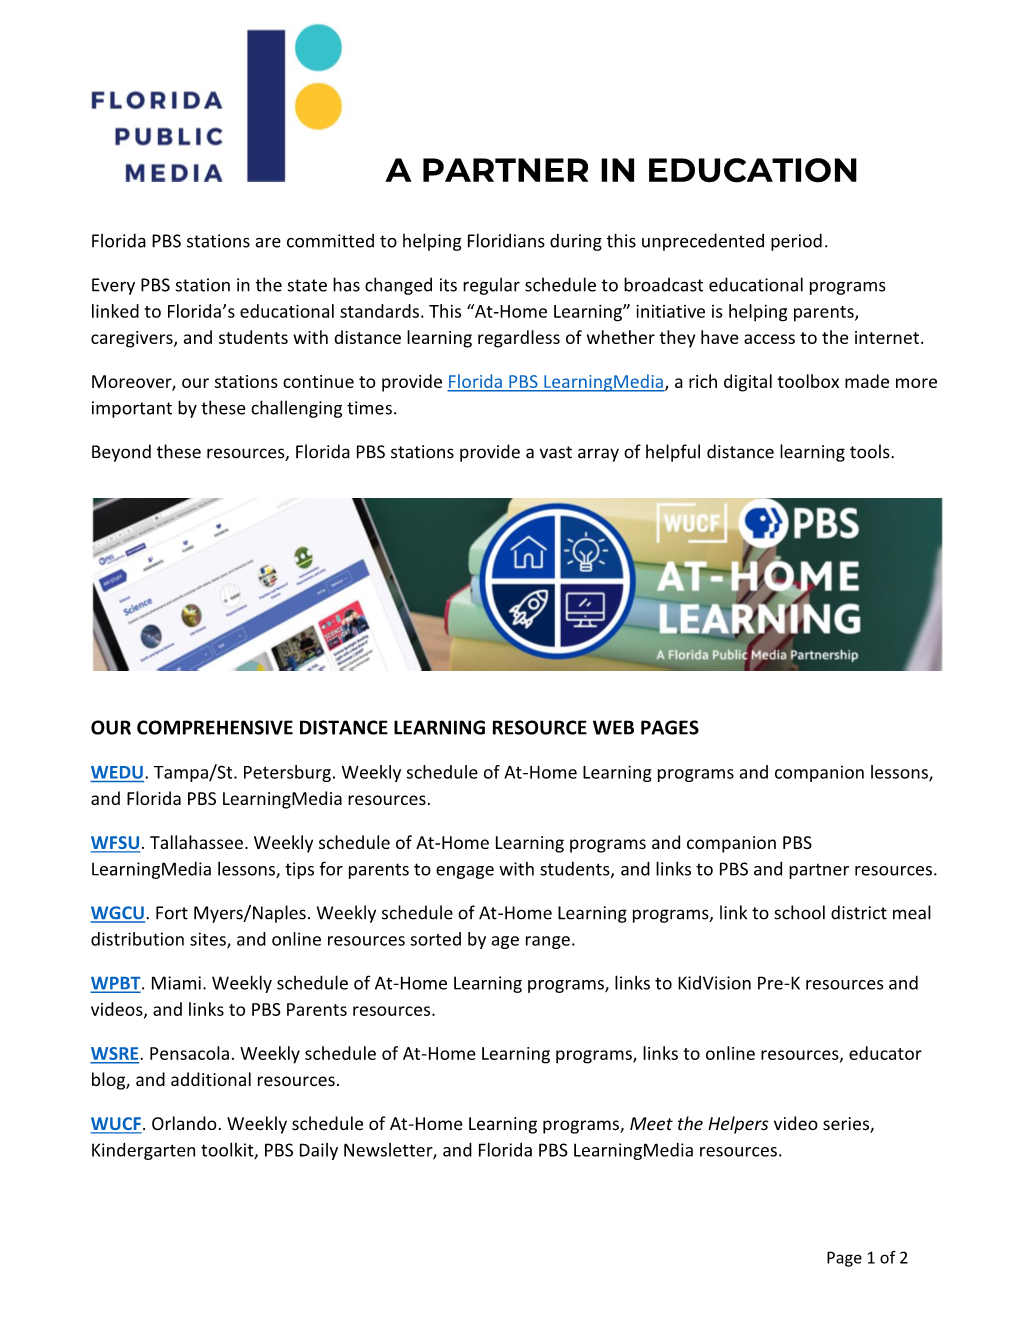 A Partner in Education